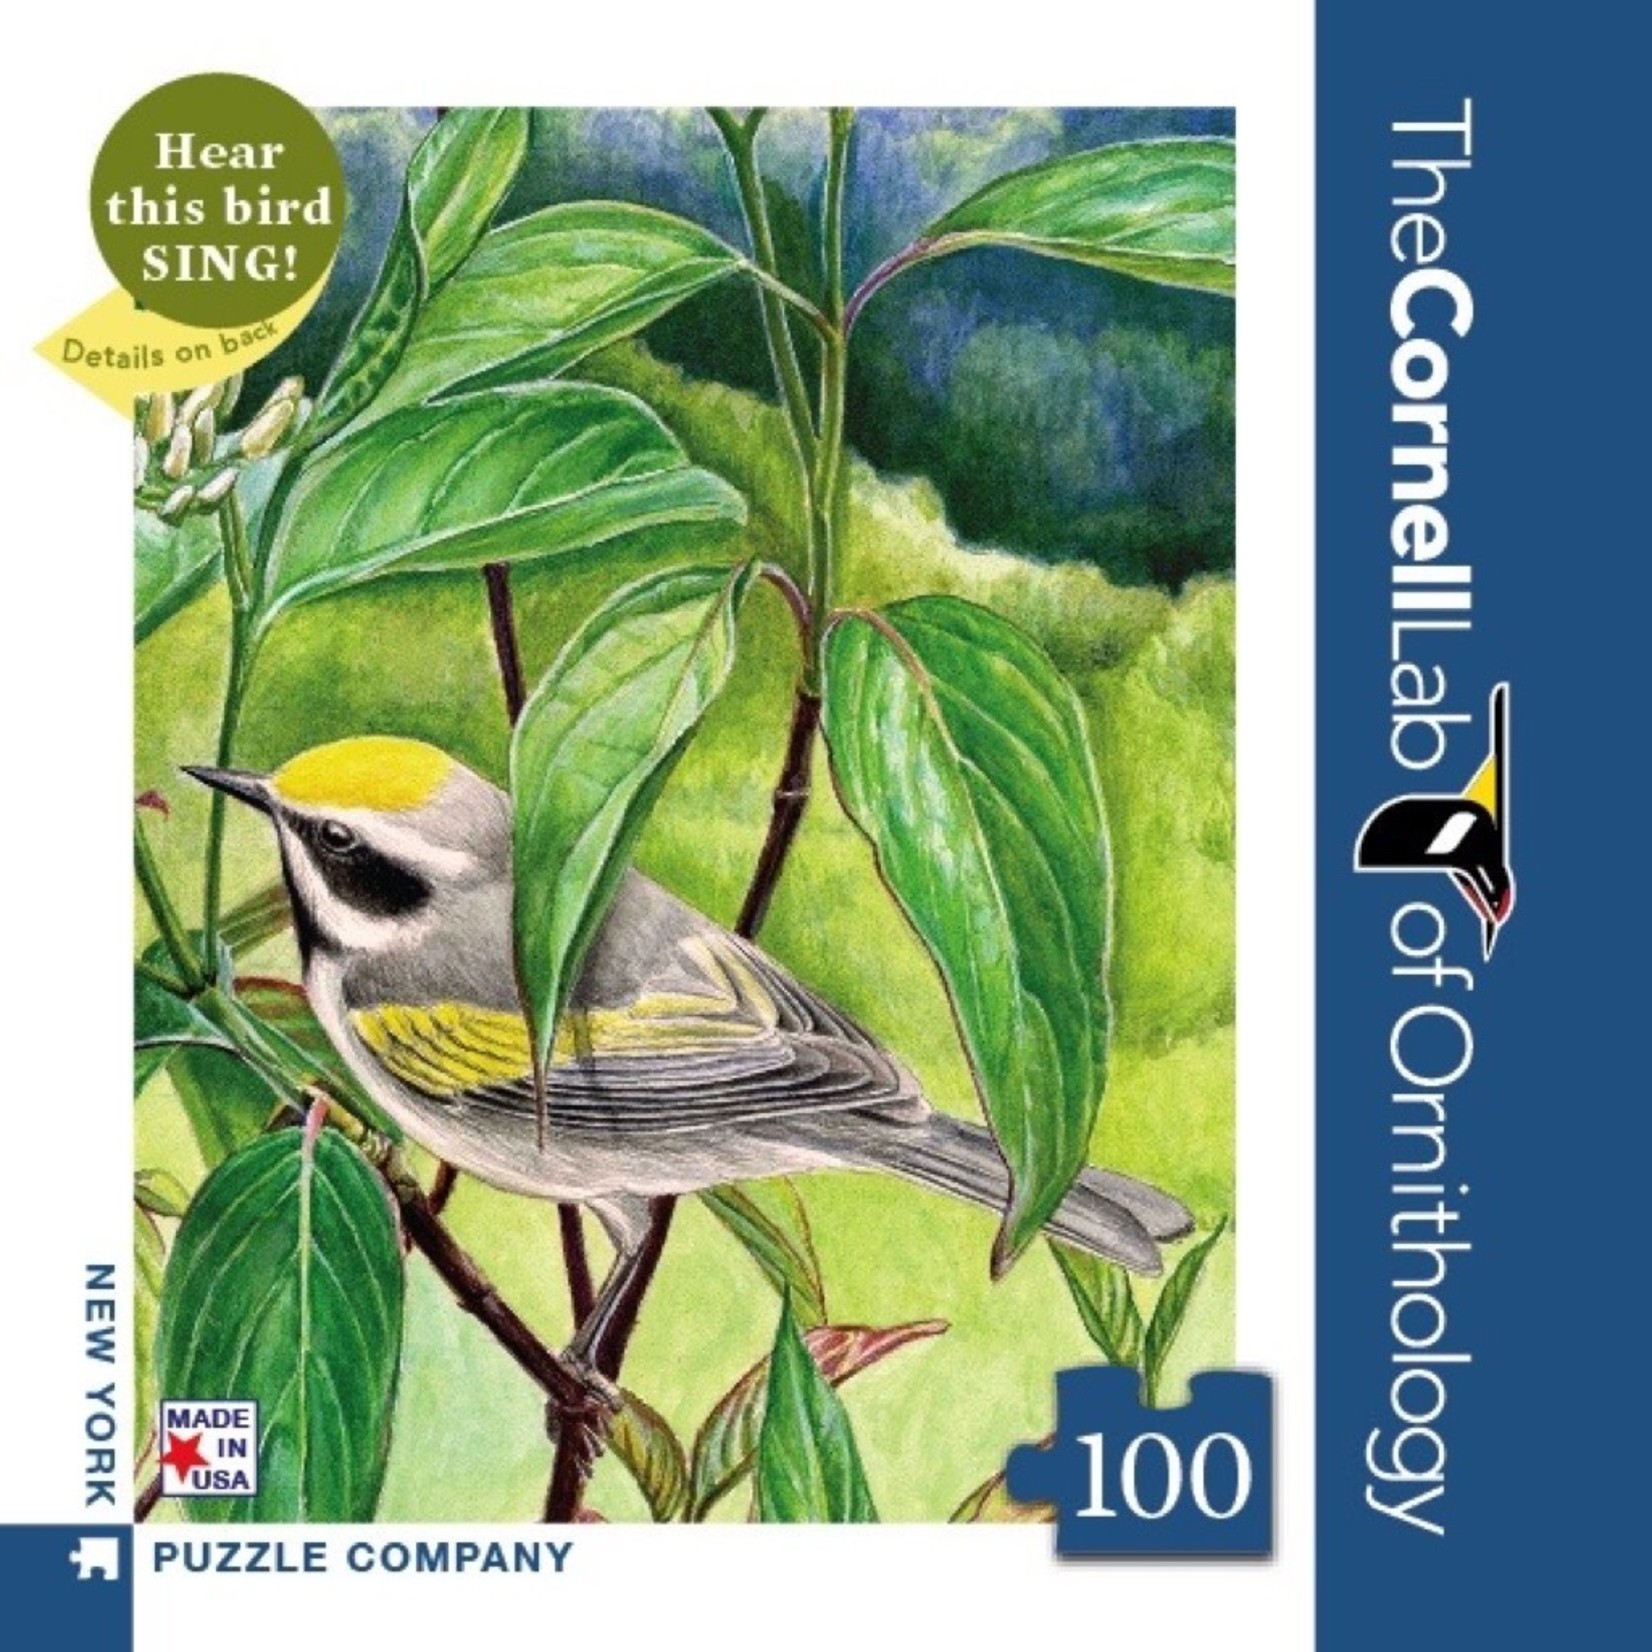 New York Puzzle Co Golden-winged Warbler Mini 100pc